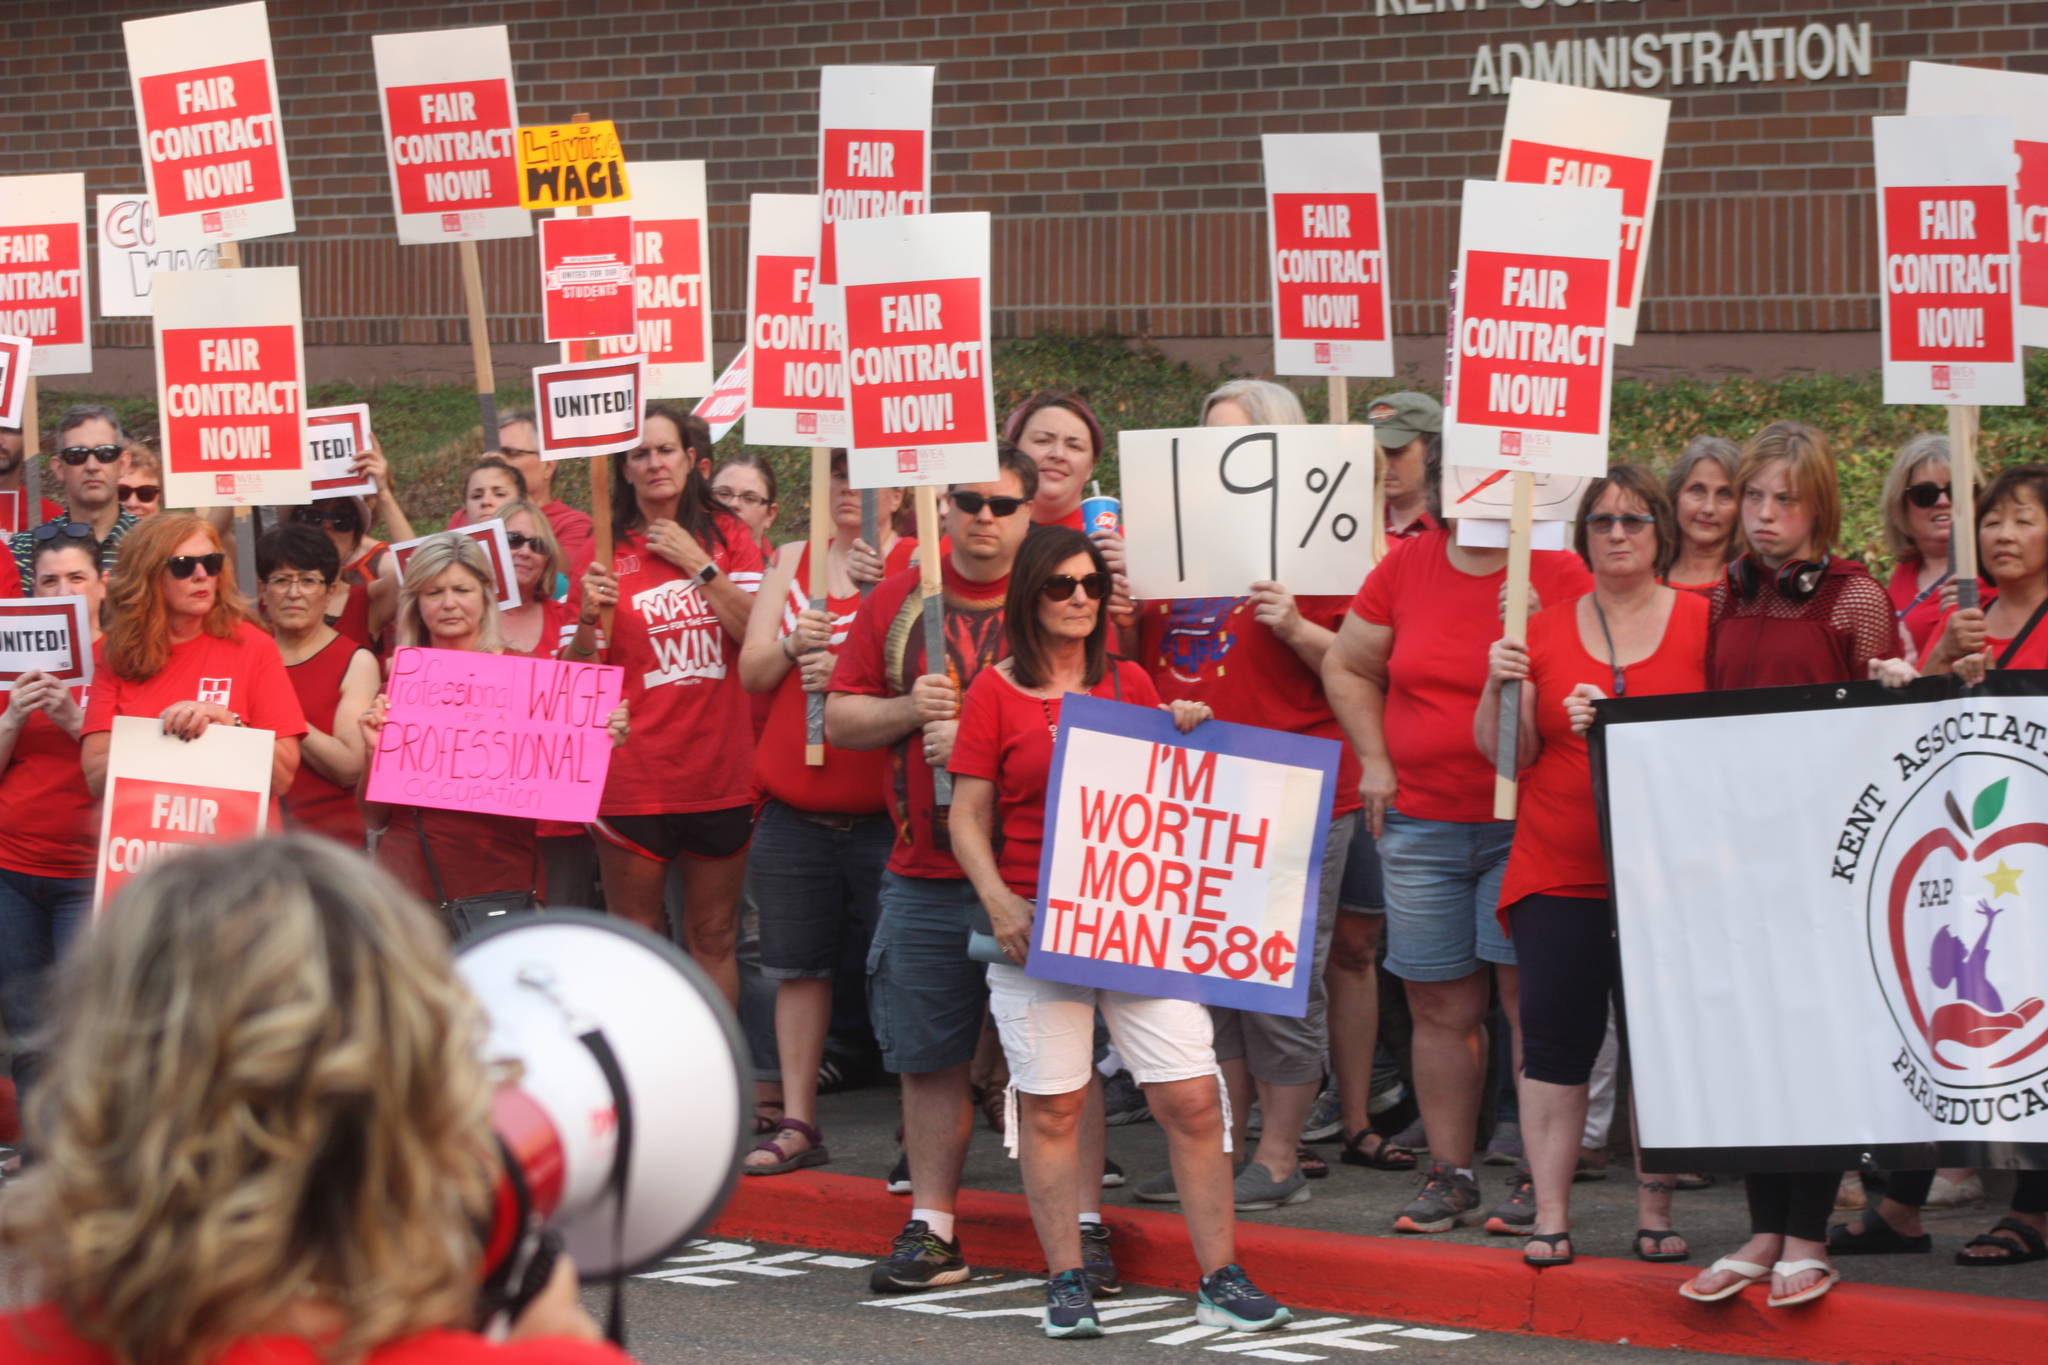 Maureen DeBoo-Cahoon, on the magaphone, leads members of the Kent Association of Paraeducators at a rally outside school district offices Wednesday. MARK KLAAS, Kent Reporter